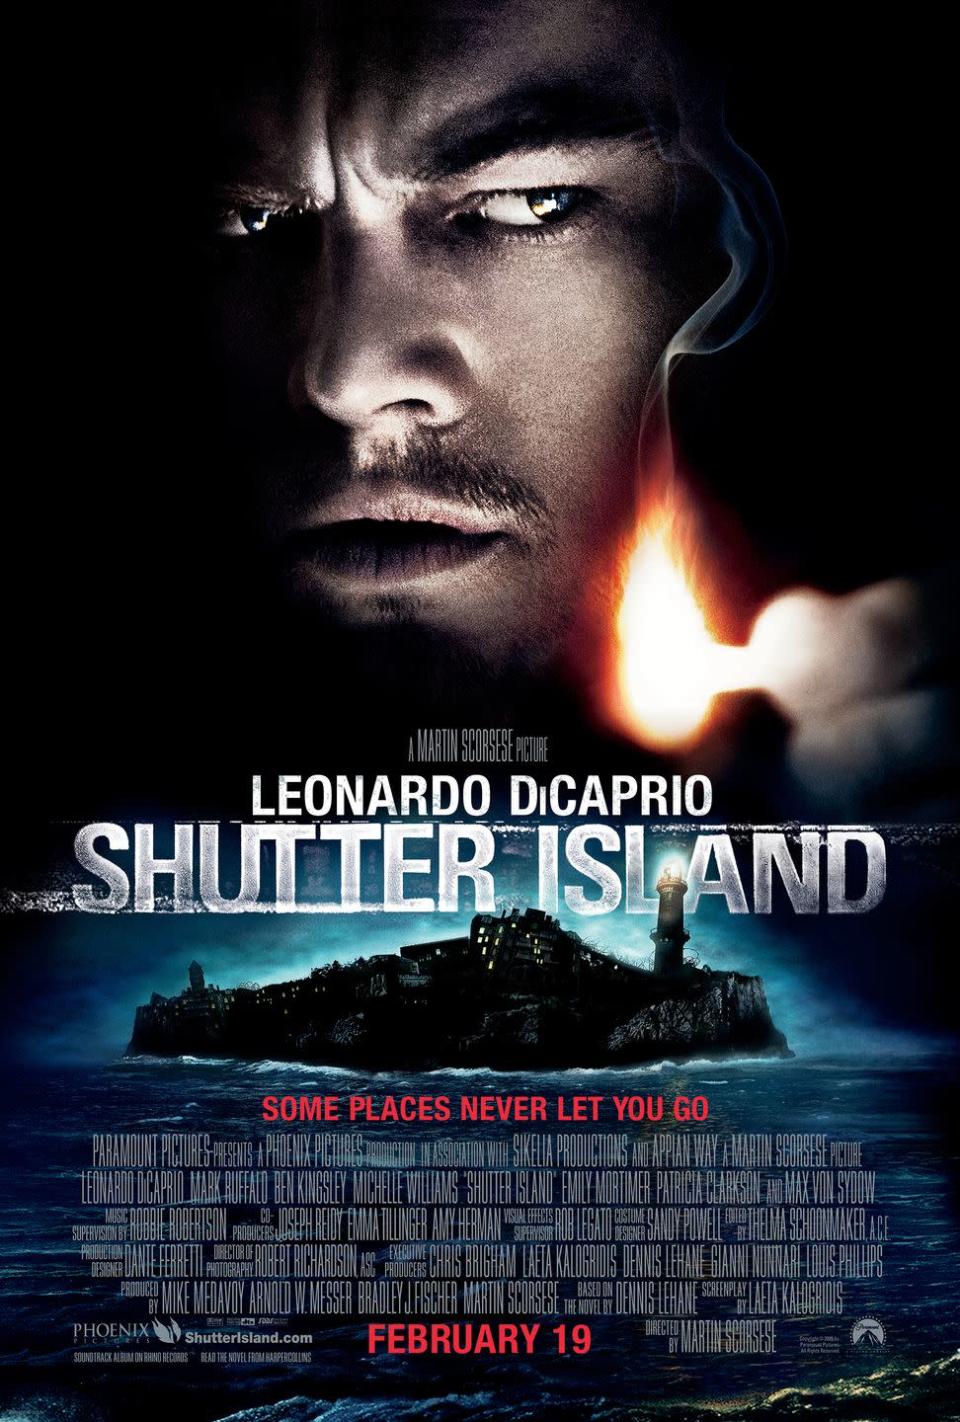 <p>Lastly, the handsome Edward Daniels (Leonardo DiCaprio) begins looking into the disappearance of a woman who escaped from a hospital for the mentally ill. But as he does, he finds his own mind might be working against him. He has to fight to make it off the island safely, in this movie that will get inside your head, too.</p><p><a class="link " href="https://www.amazon.com/Shutter-Island-Leonardo-DiCaprio/dp/B009CF6NFK/?tag=syn-yahoo-20&ascsubtag=%5Bartid%7C10055.g.33446242%5Bsrc%7Cyahoo-us" rel="nofollow noopener" target="_blank" data-ylk="slk:STREAM NOW">STREAM NOW</a></p>